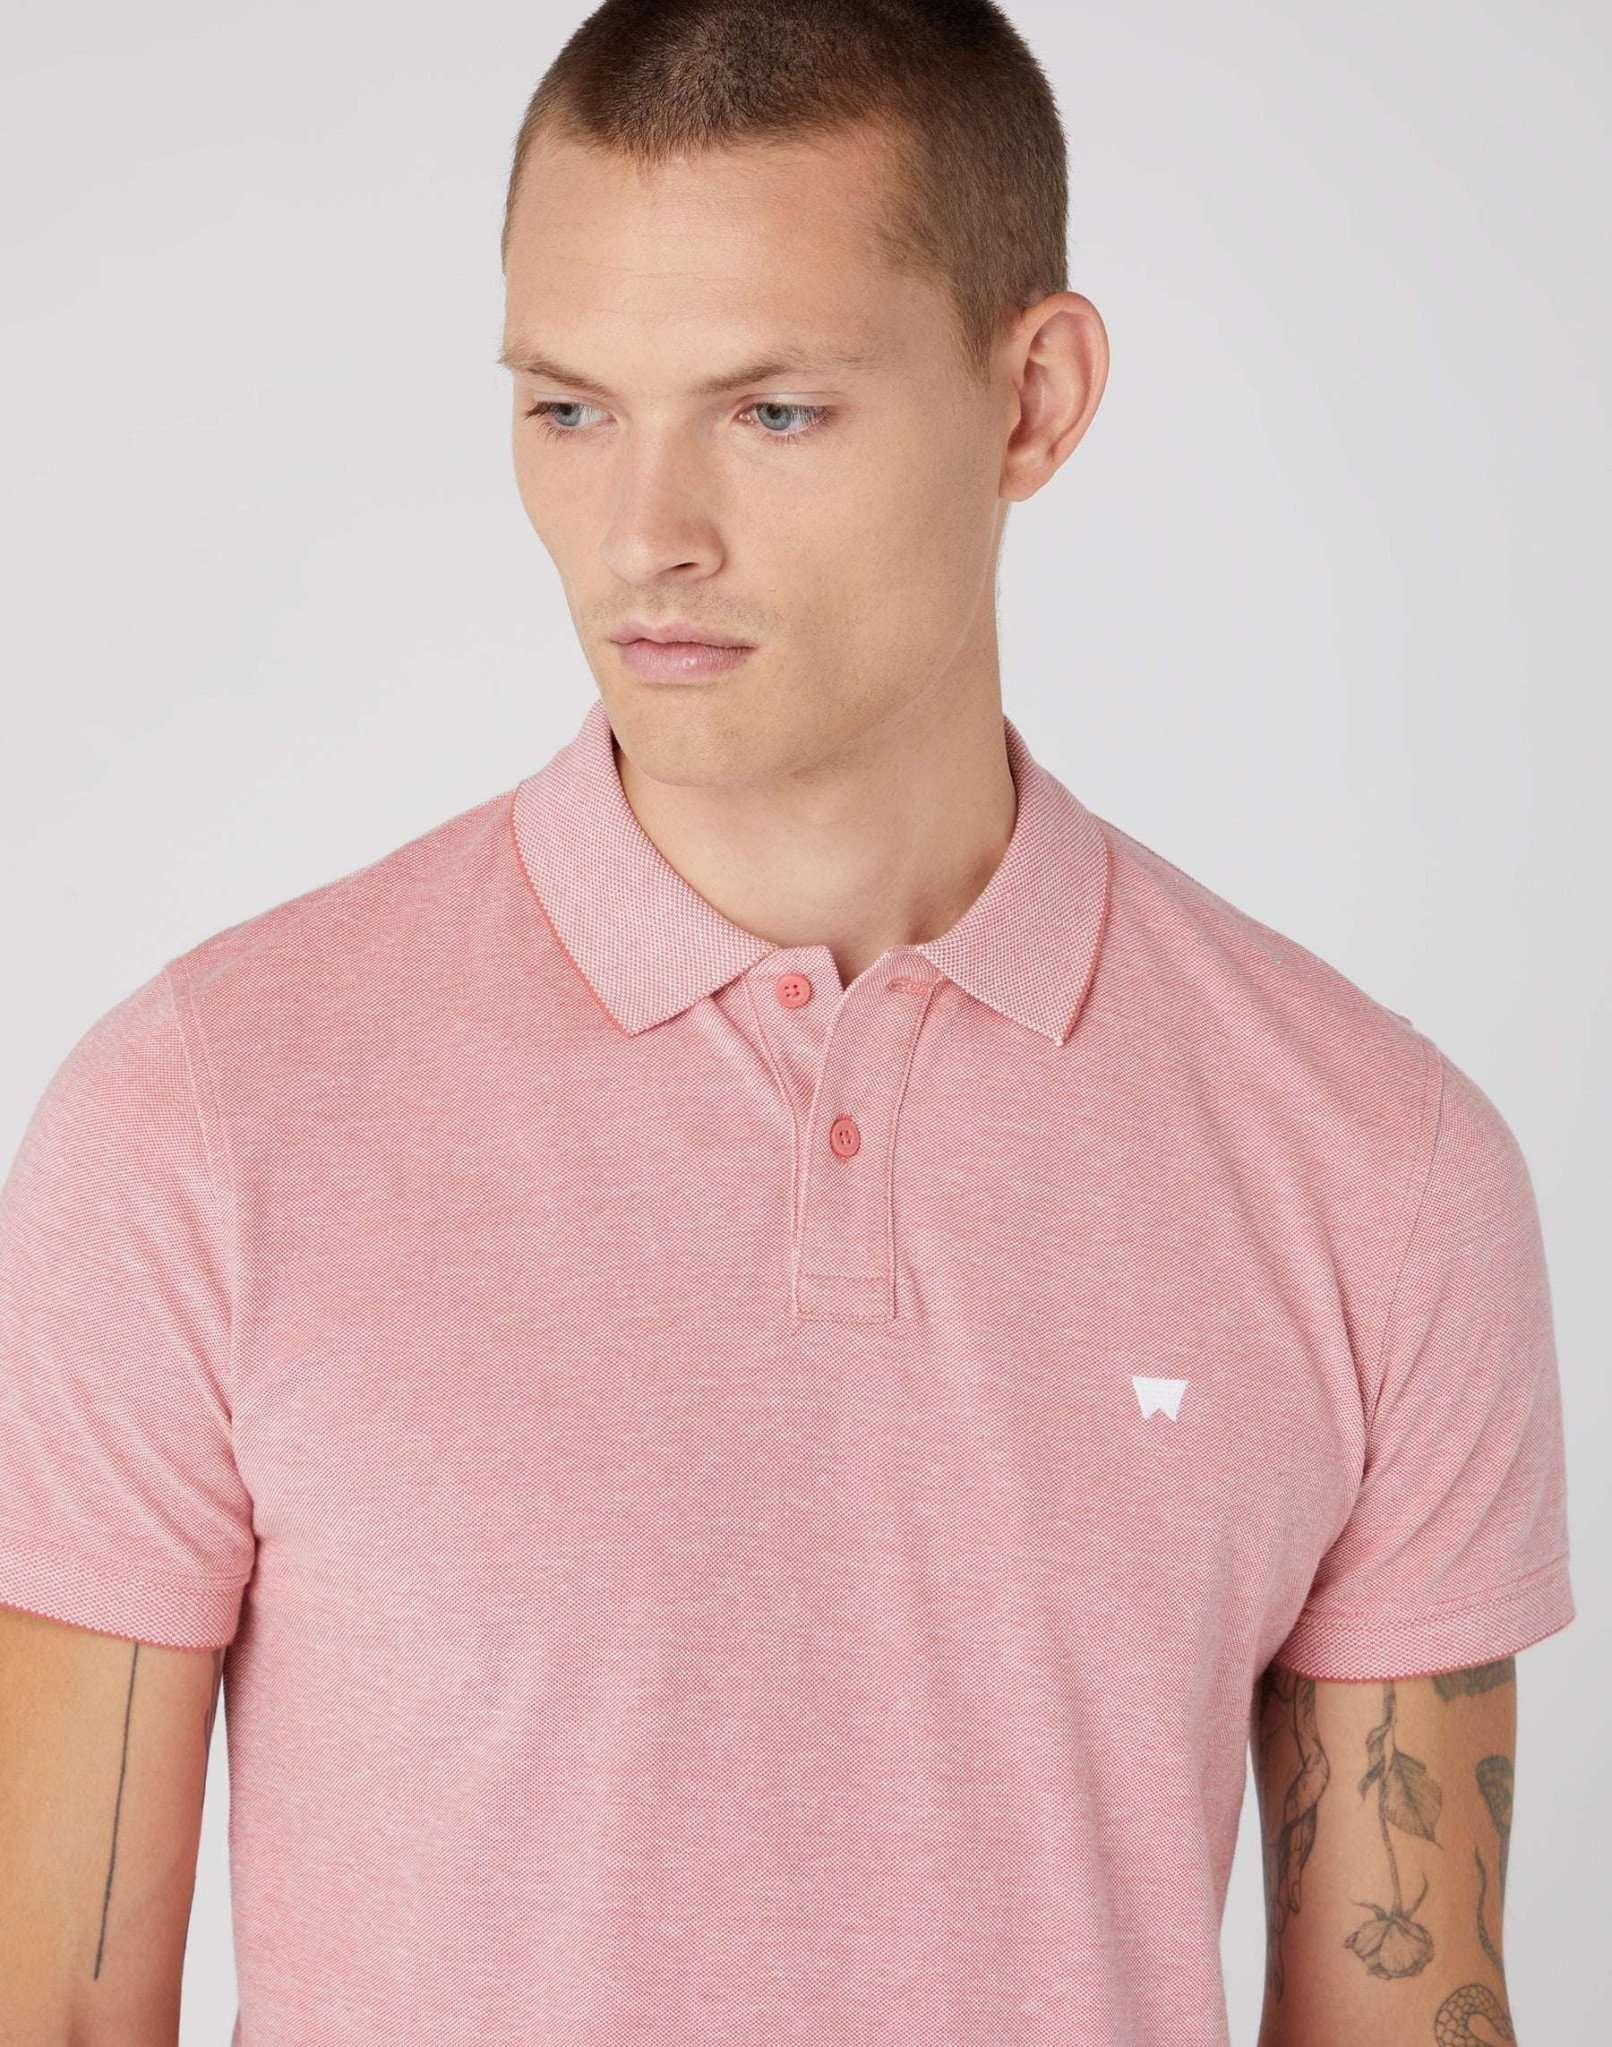 Refined Polo Shirt in Faded Rose Polos Wrangler   